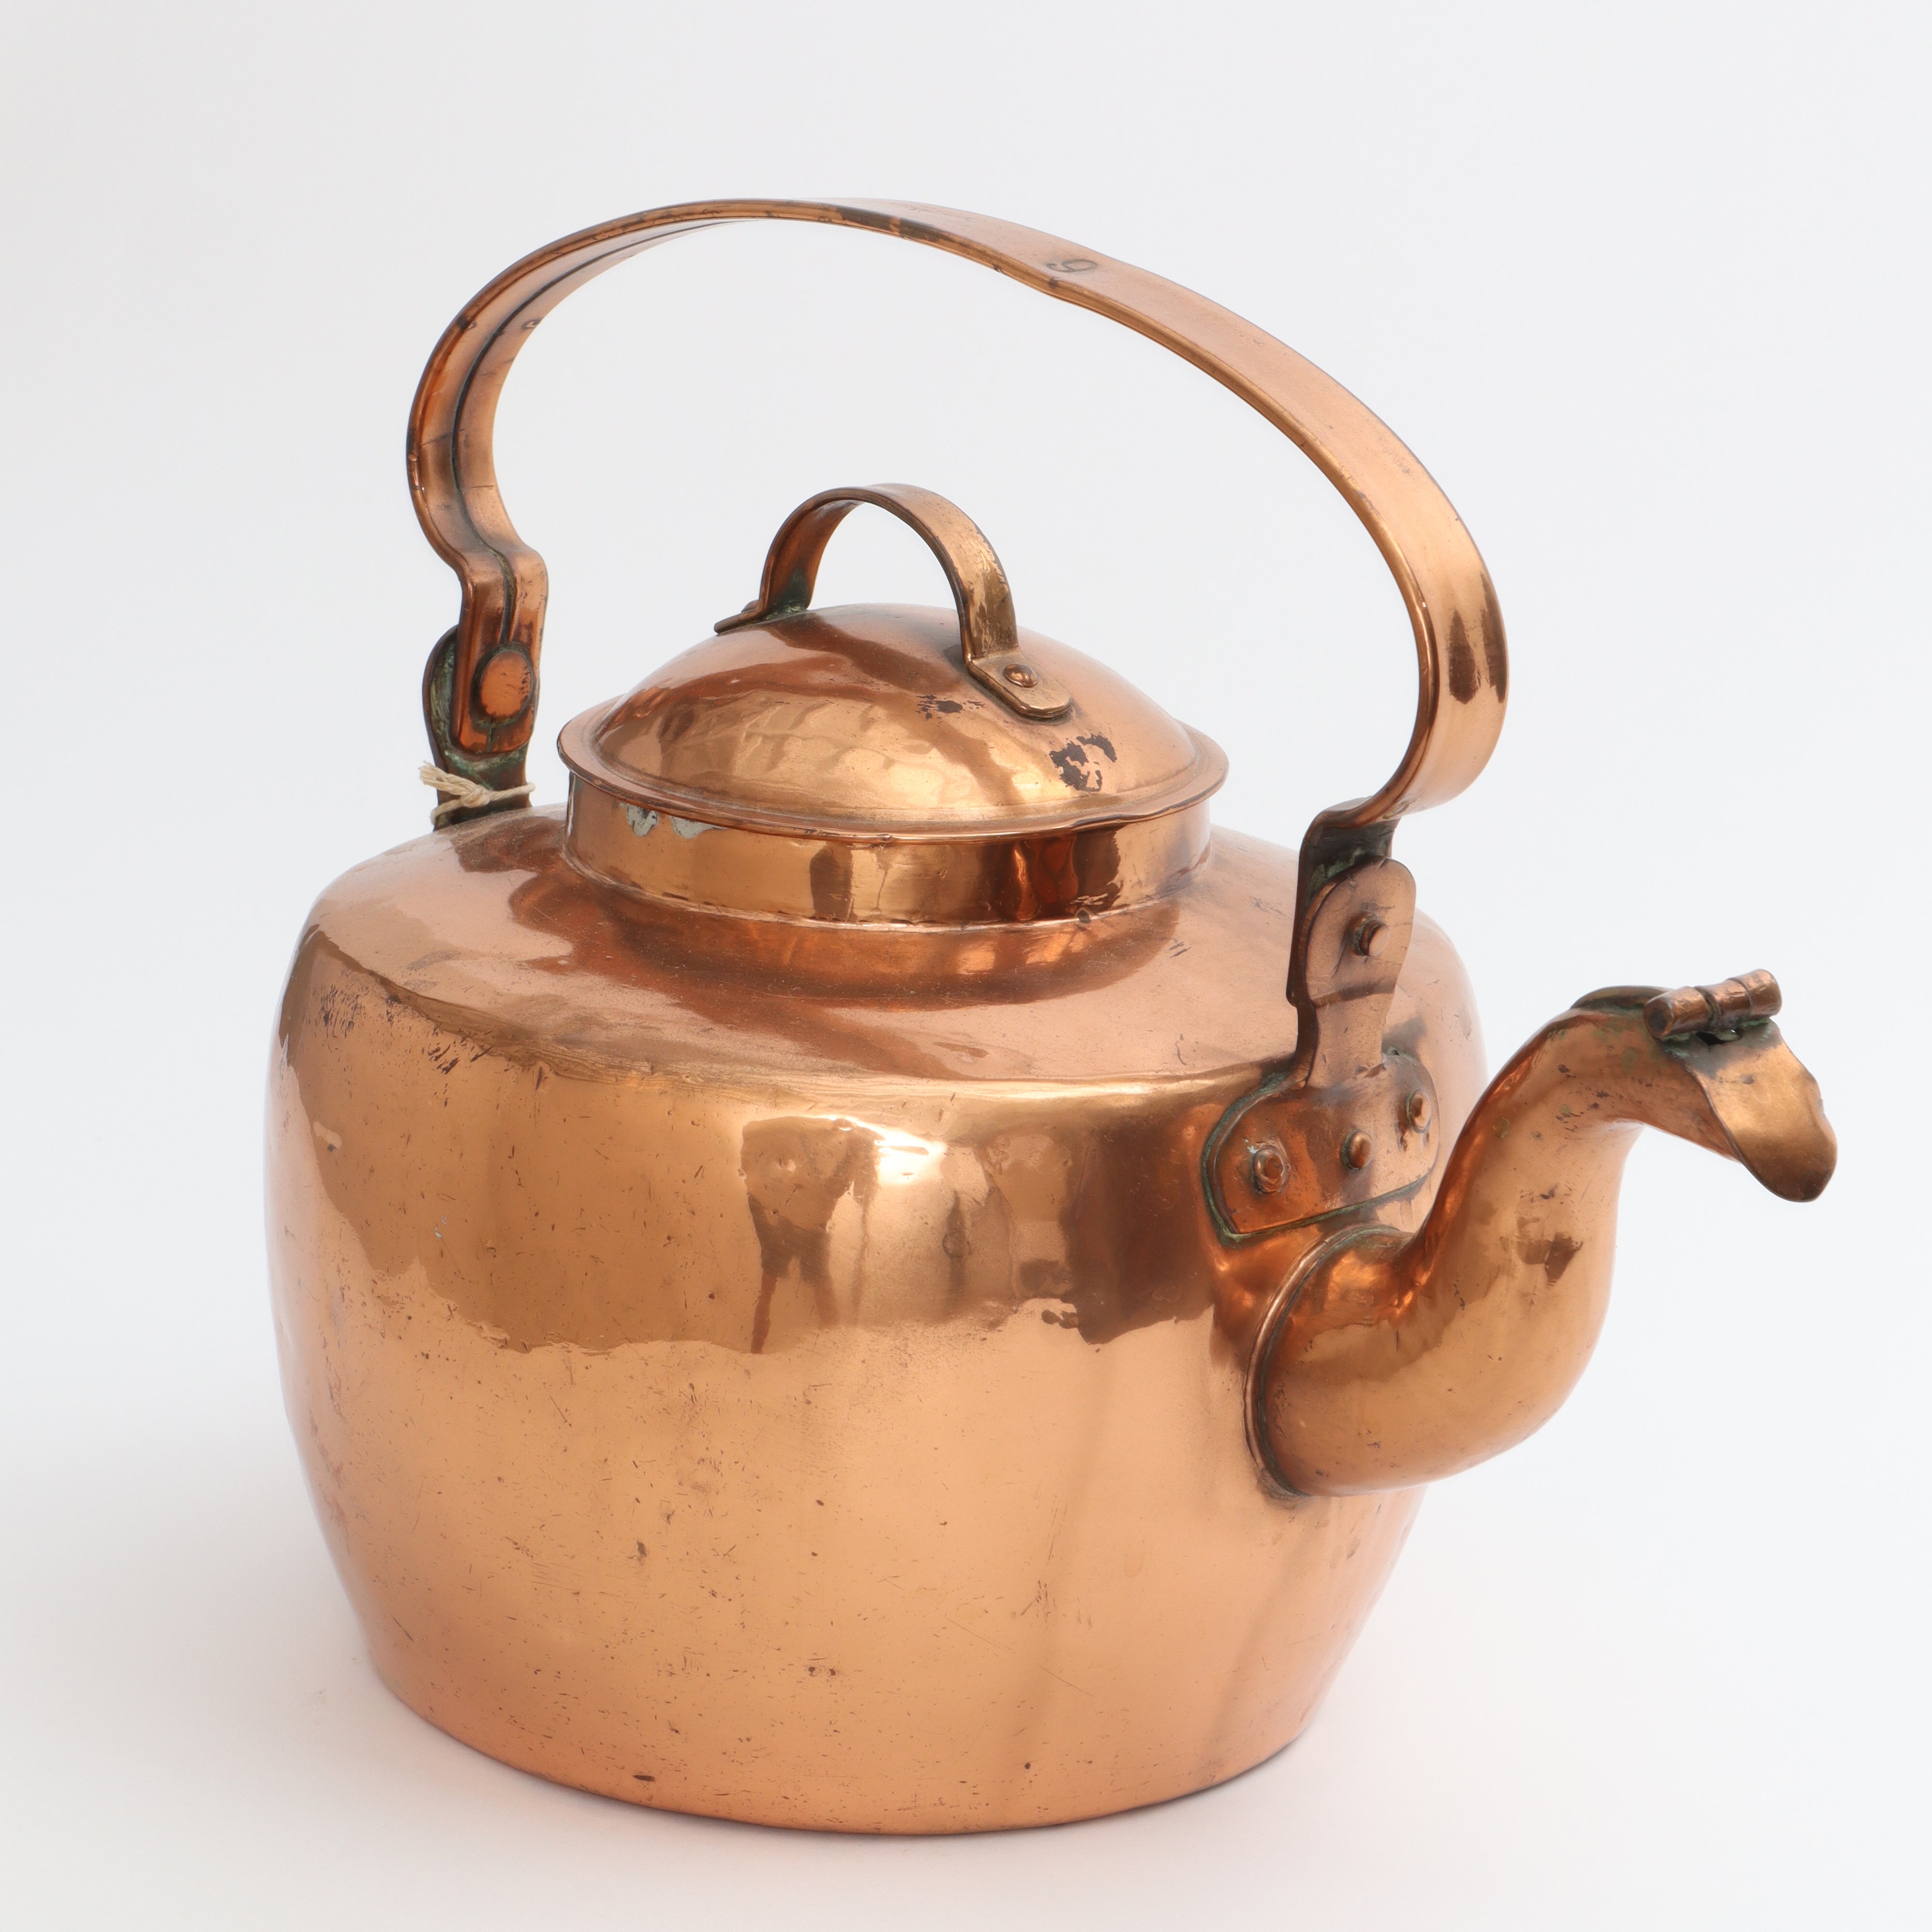 The Classic Copper English Tea Kettle - Coming Soon - Email to